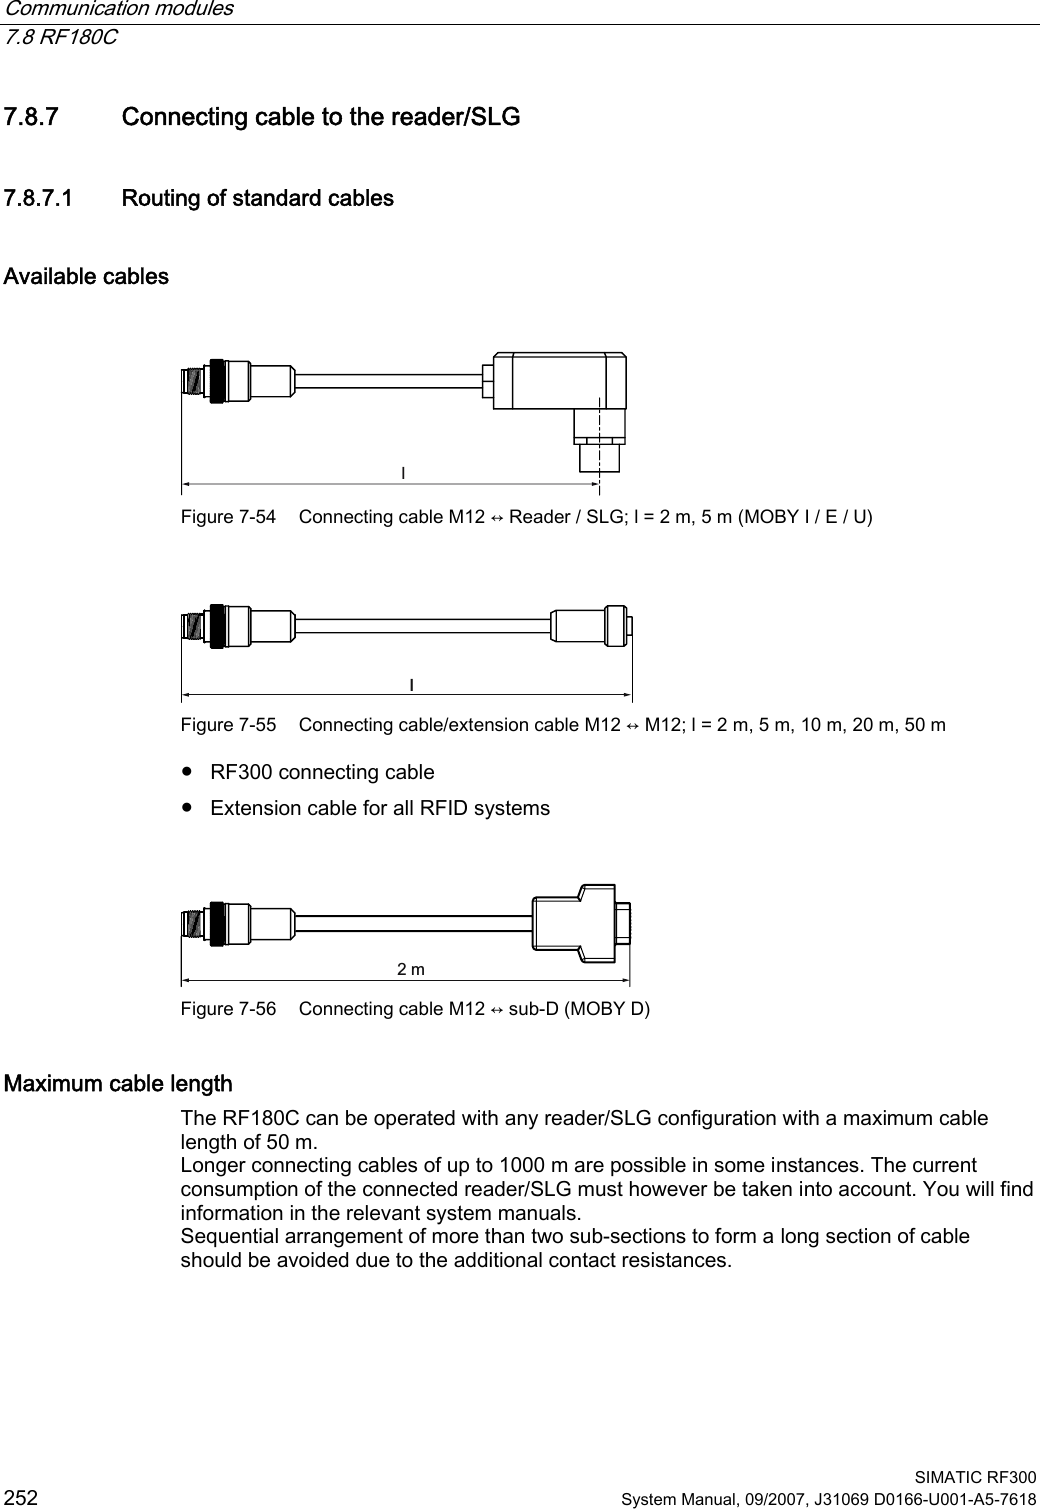 Communication modules   7.8 RF180C  SIMATIC RF300 252 System Manual, 09/2007, J31069 D0166-U001-A5-7618 7.8.7 Connecting cable to the reader/SLG 7.8.7.1 Routing of standard cables Available cables  O Figure 7-54  Connecting cable M12 ↔ Reader / SLG; l = 2 m, 5 m (MOBY I / E / U)  O Figure 7-55  Connecting cable/extension cable M12 ↔ M12; l = 2 m, 5 m, 10 m, 20 m, 50 m ●  RF300 connecting cable ●  Extension cable for all RFID systems  P Figure 7-56  Connecting cable M12 ↔ sub-D (MOBY D) Maximum cable length The RF180C can be operated with any reader/SLG configuration with a maximum cable length of 50 m. Longer connecting cables of up to 1000 m are possible in some instances. The current consumption of the connected reader/SLG must however be taken into account. You will find information in the relevant system manuals. Sequential arrangement of more than two sub-sections to form a long section of cable should be avoided due to the additional contact resistances. 